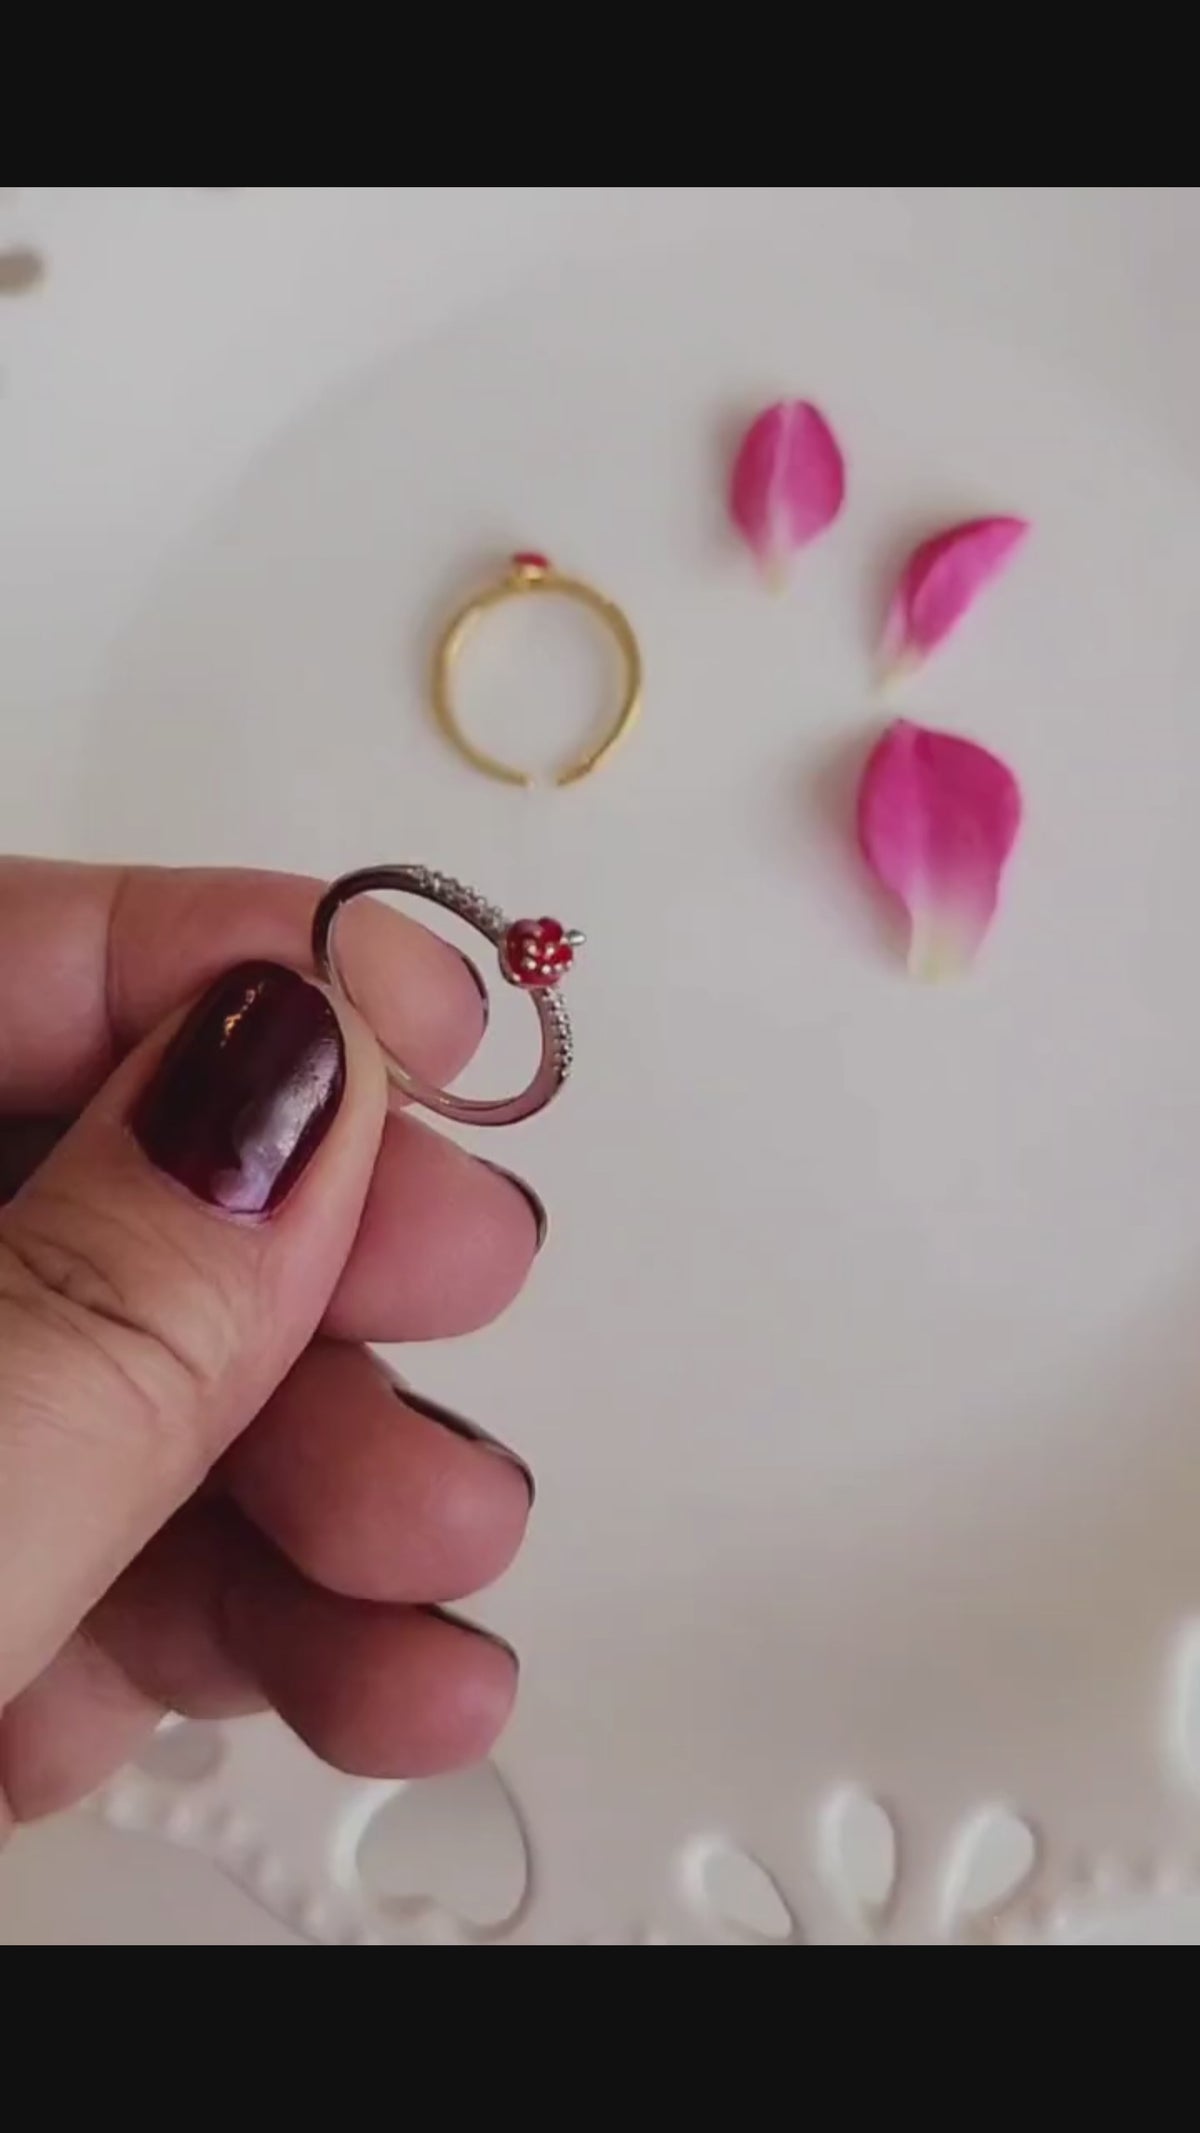 Strawberry Ring - Adjustable Knuckle Ring